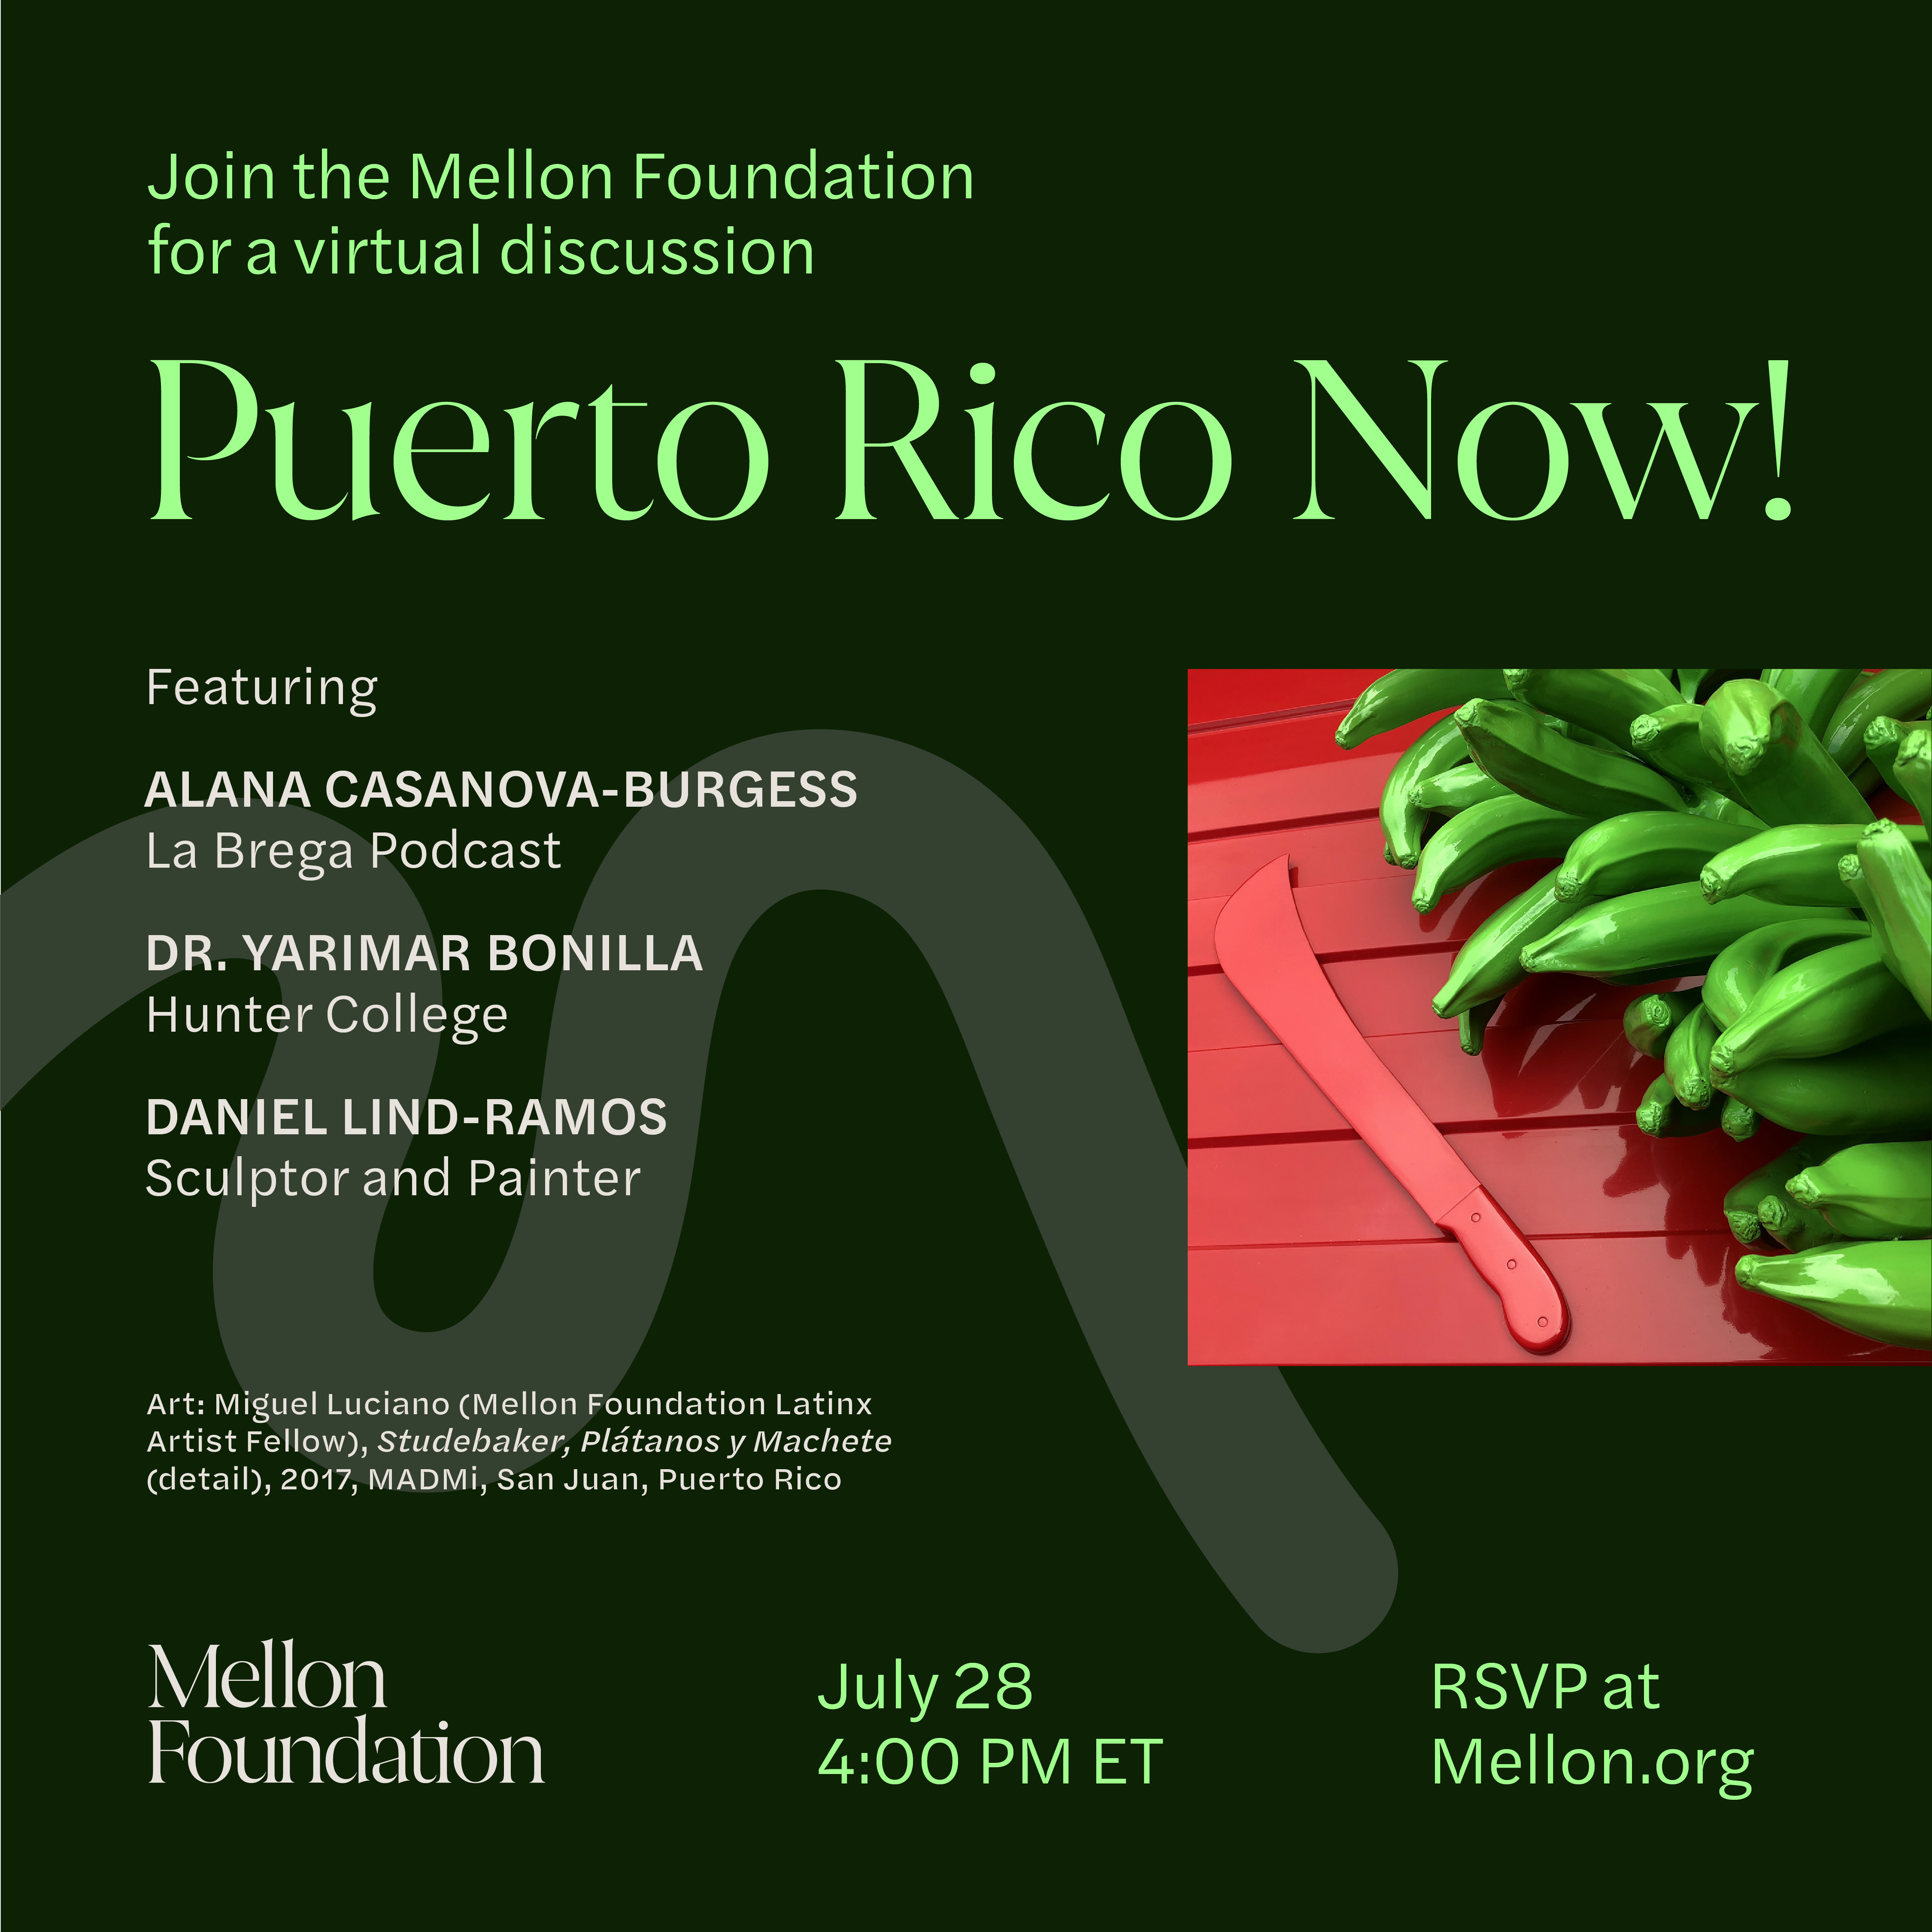 The Mellon Foundation invites you to Puerto Rico Now! –– An Online Event